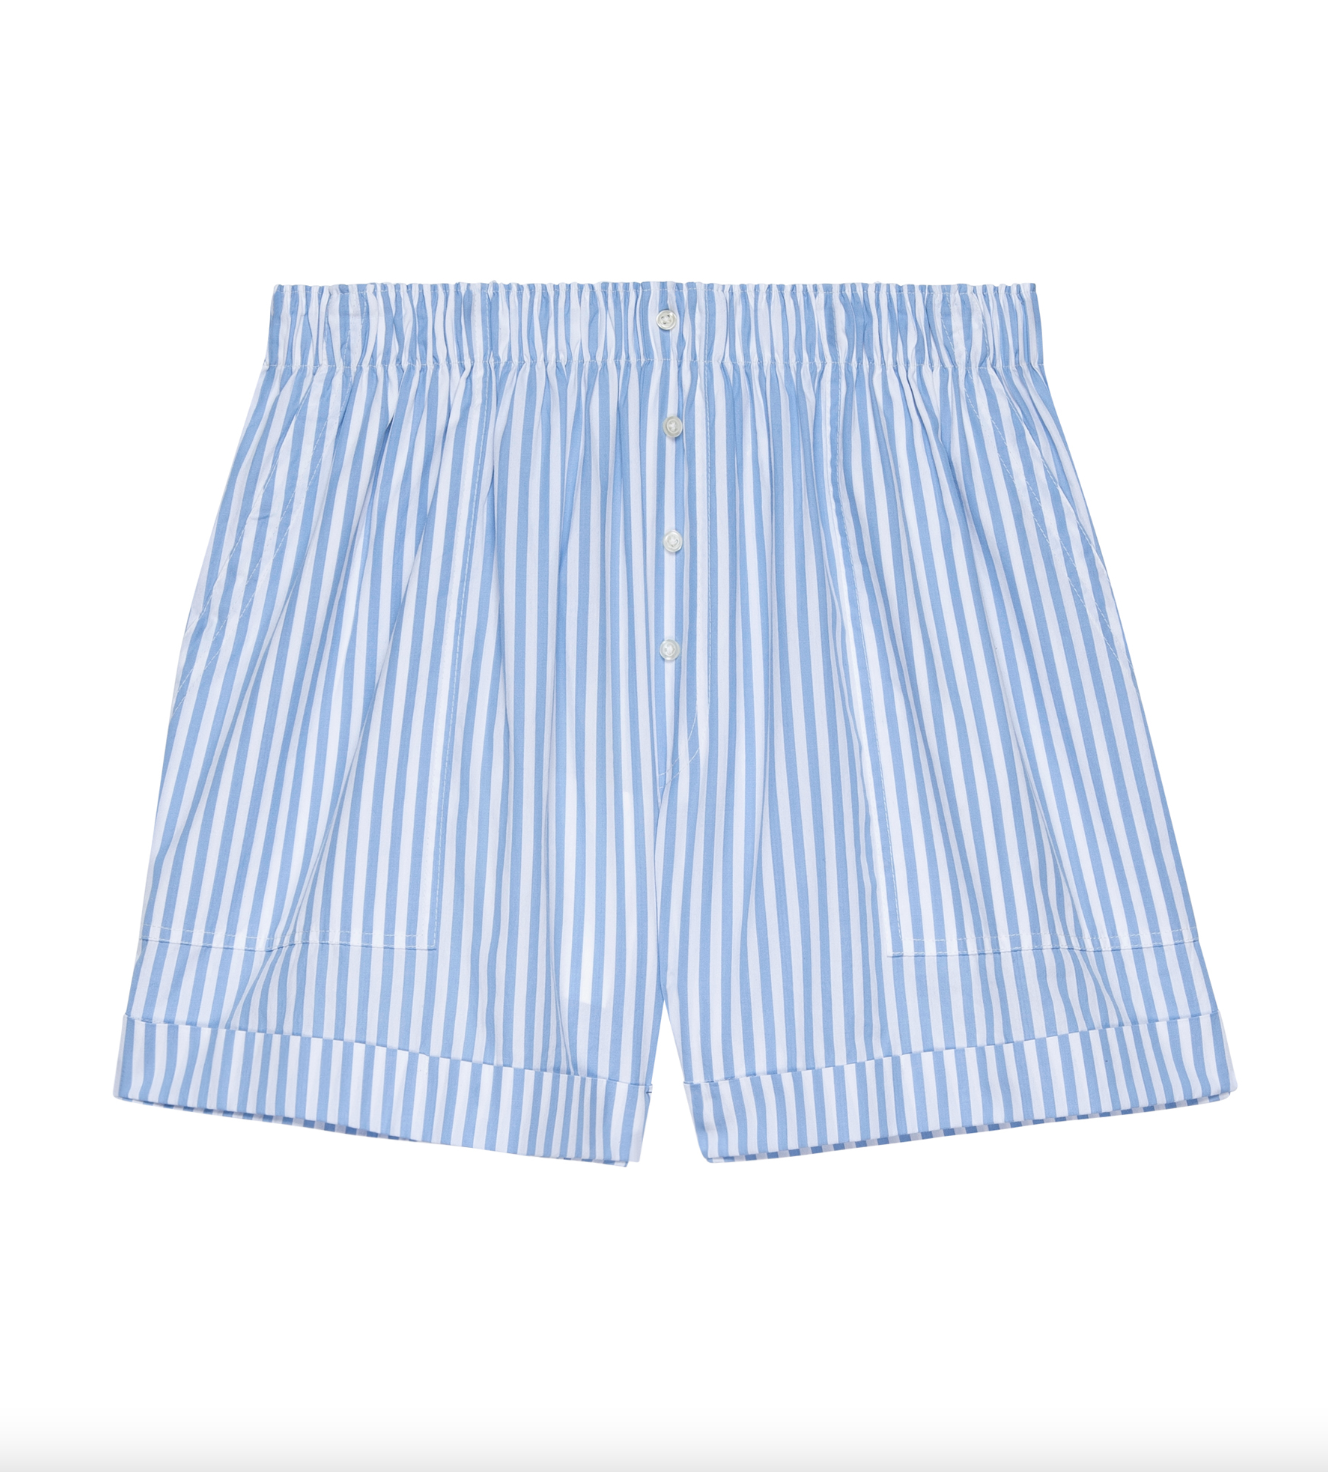 A pair of The Great Inc. men's Boxer Short LIGHT SKY STUDIO STRIPE with blue and white vertical stripes, featuring a buttoned fly, displayed on a white background in Scottsdale Arizona.